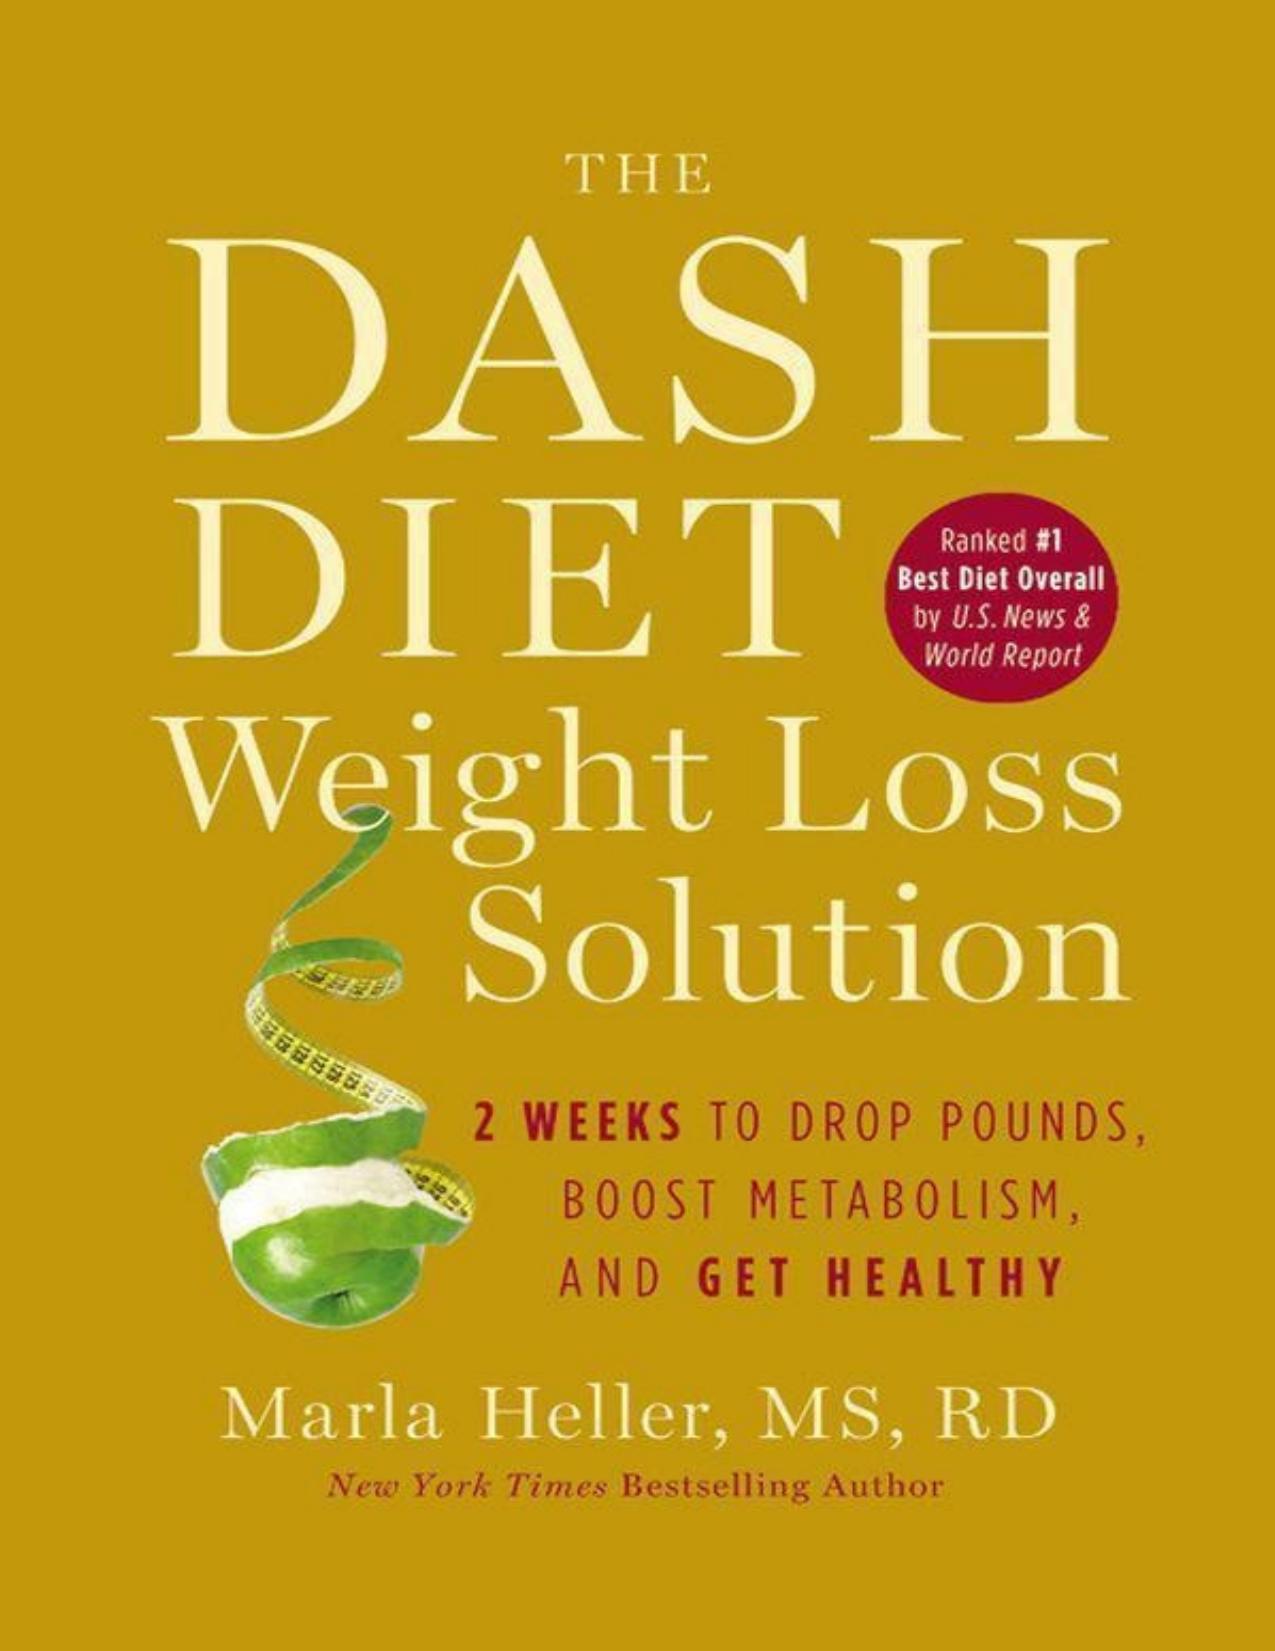 The Dash Diet Weight Loss Solution: 2 Weeks to Drop Pounds, Boost Metabolism, and Get Healthy (A DASH Diet Book) by Heller Marla